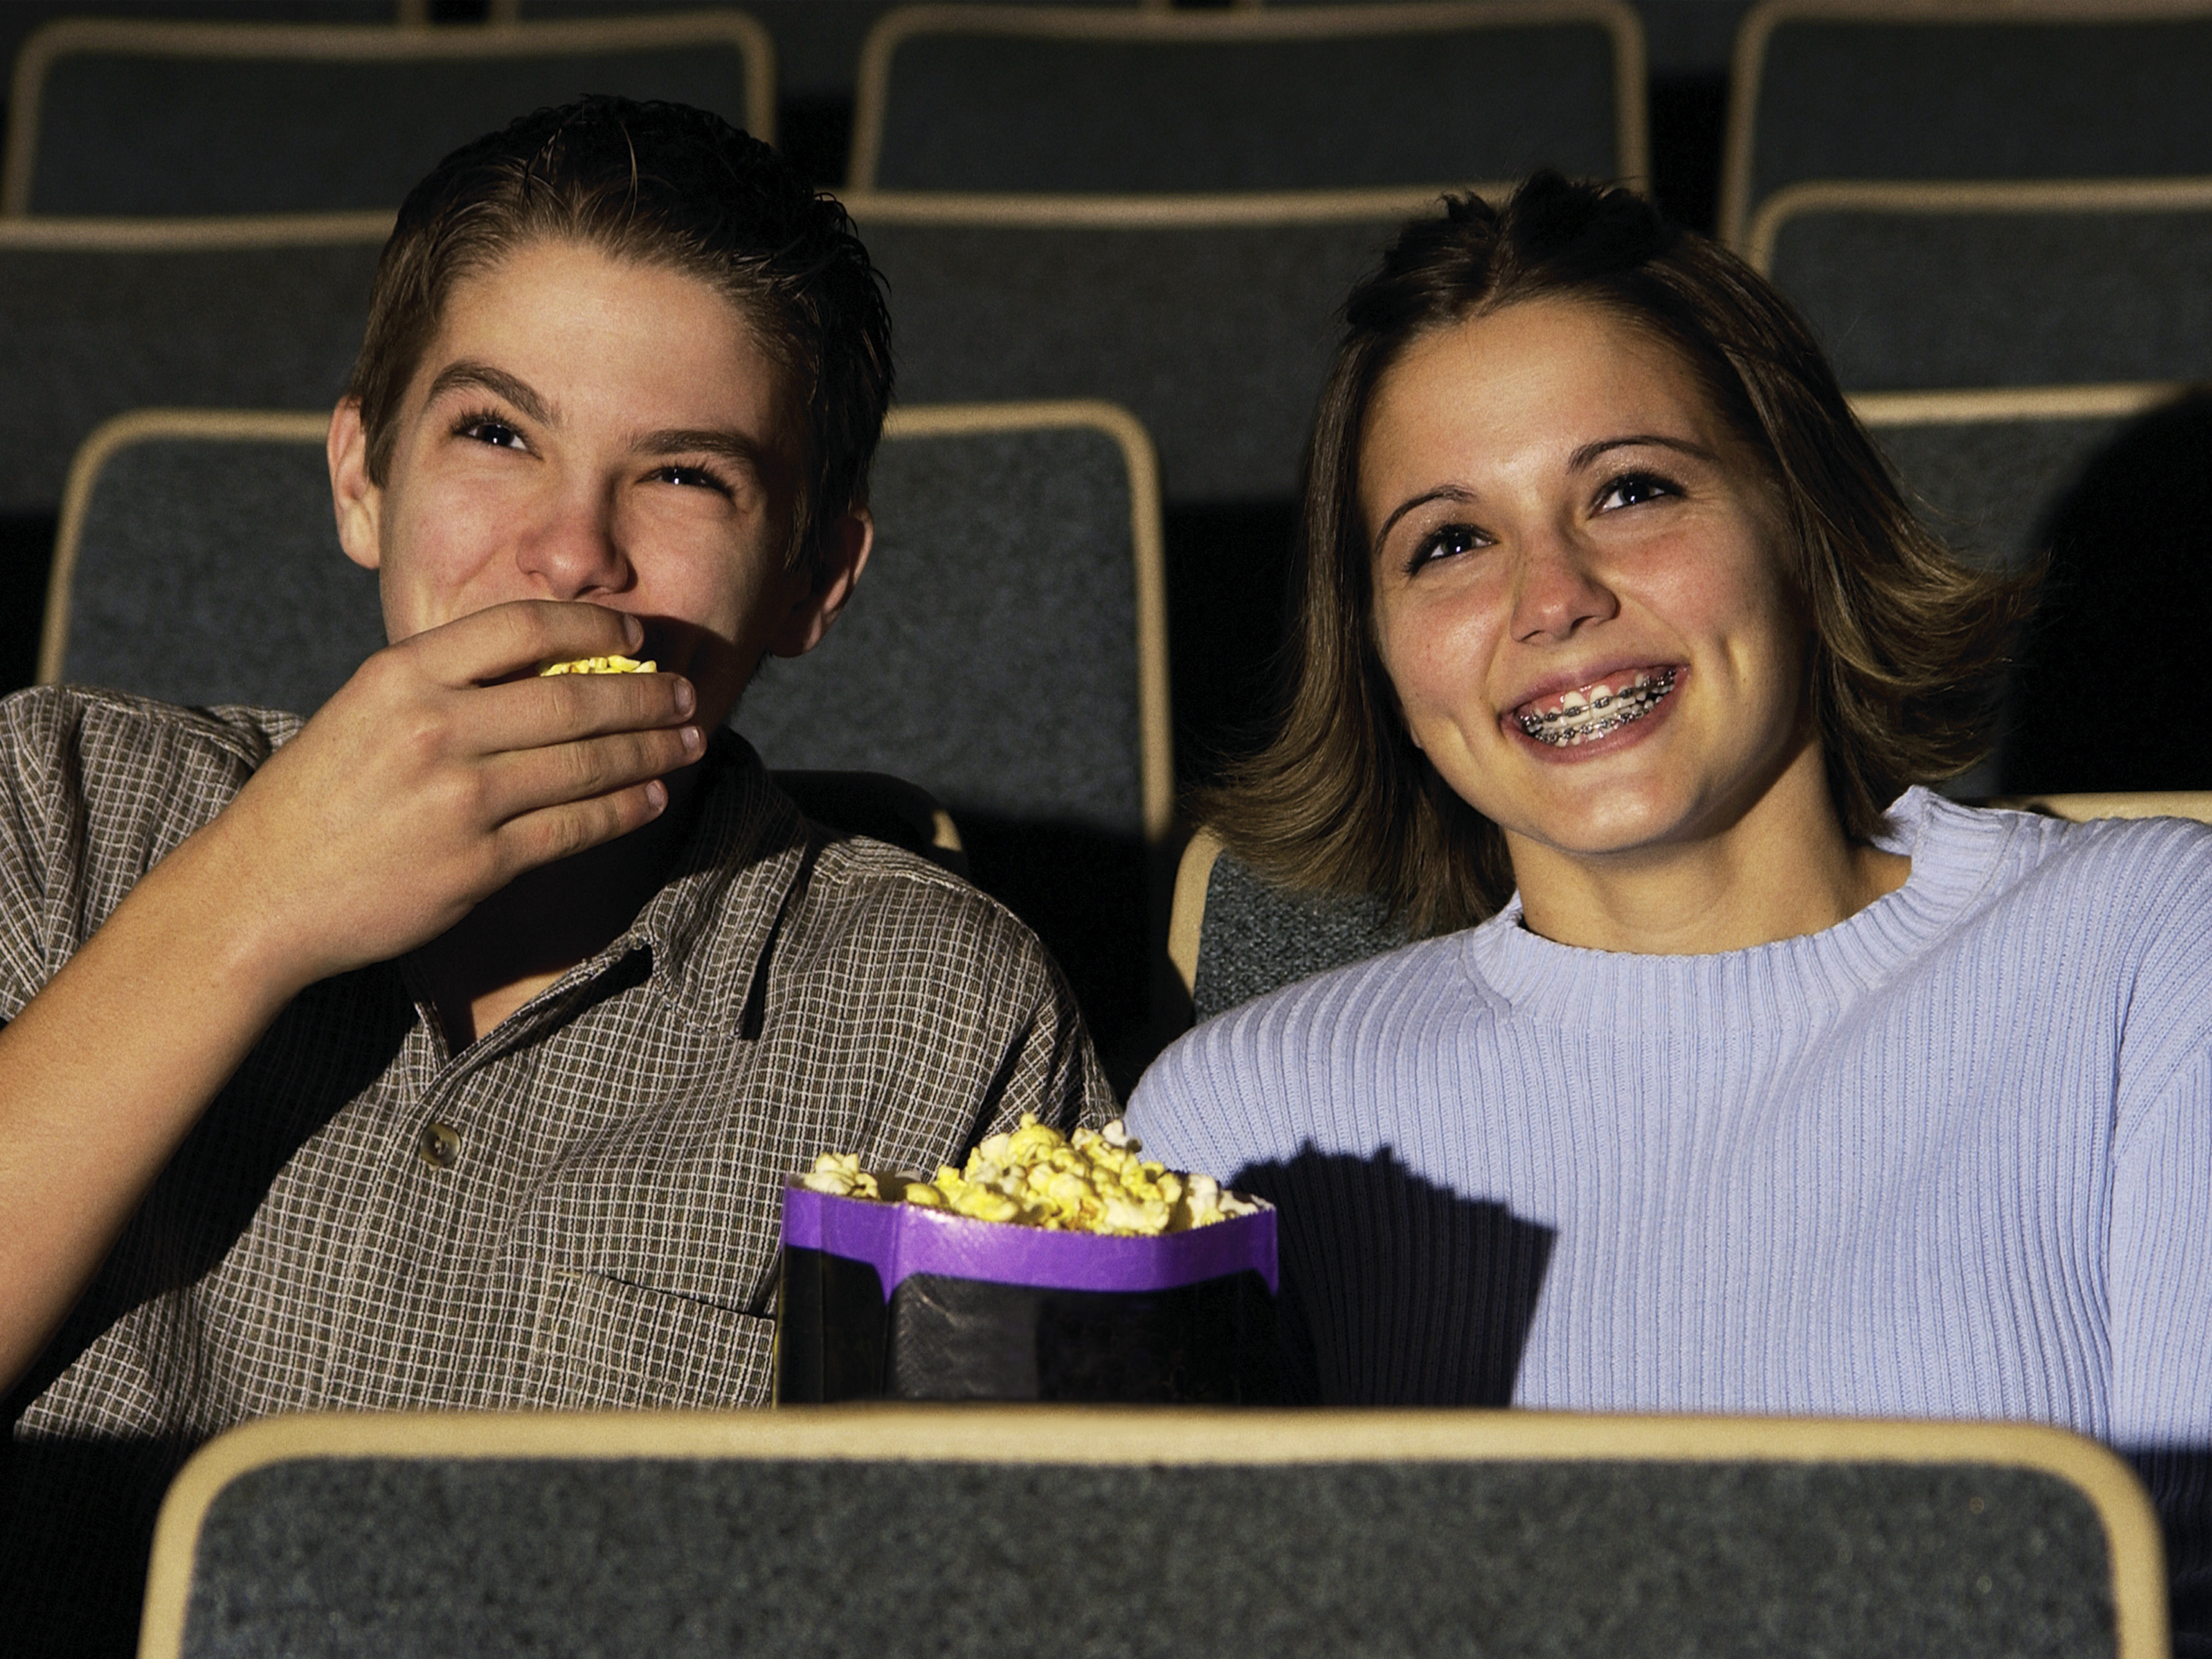 teens with braces eating popcorn in the theater